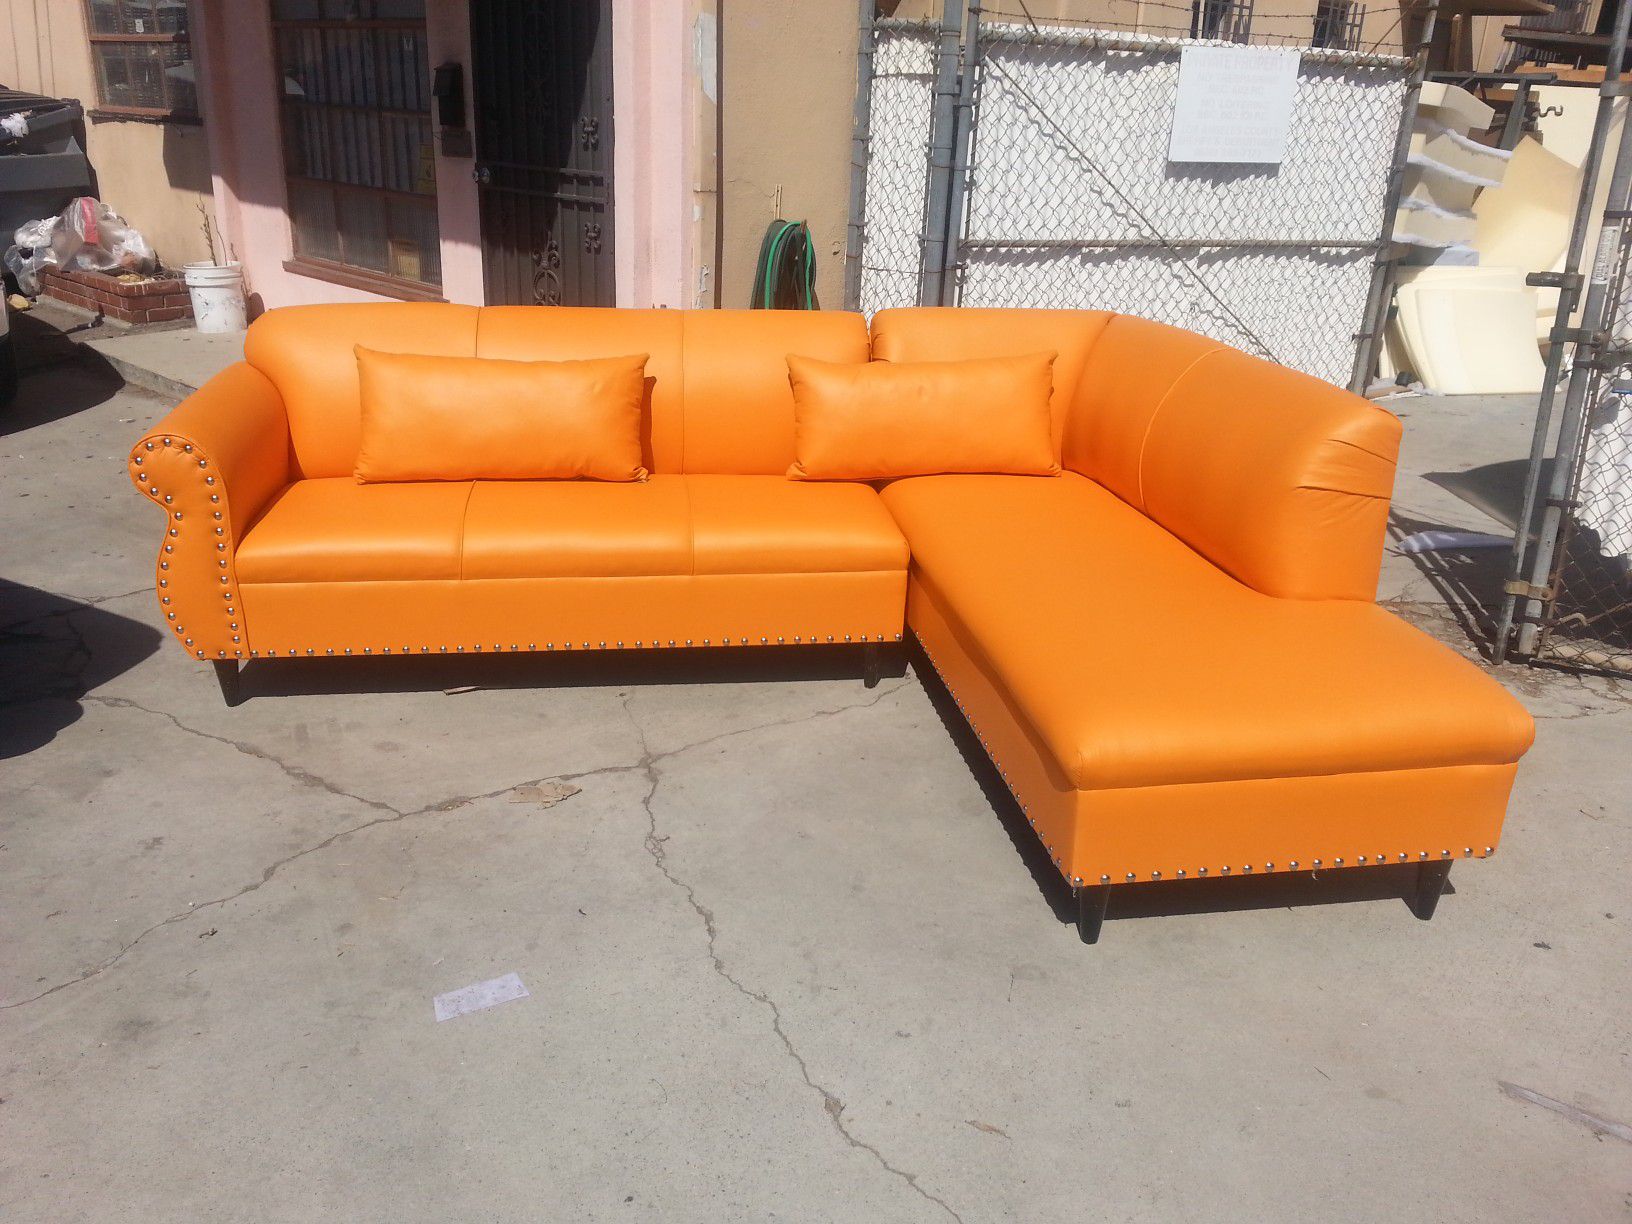 NEW 9X7FT ORANGE LEATHER SECTIONAL CHAISE